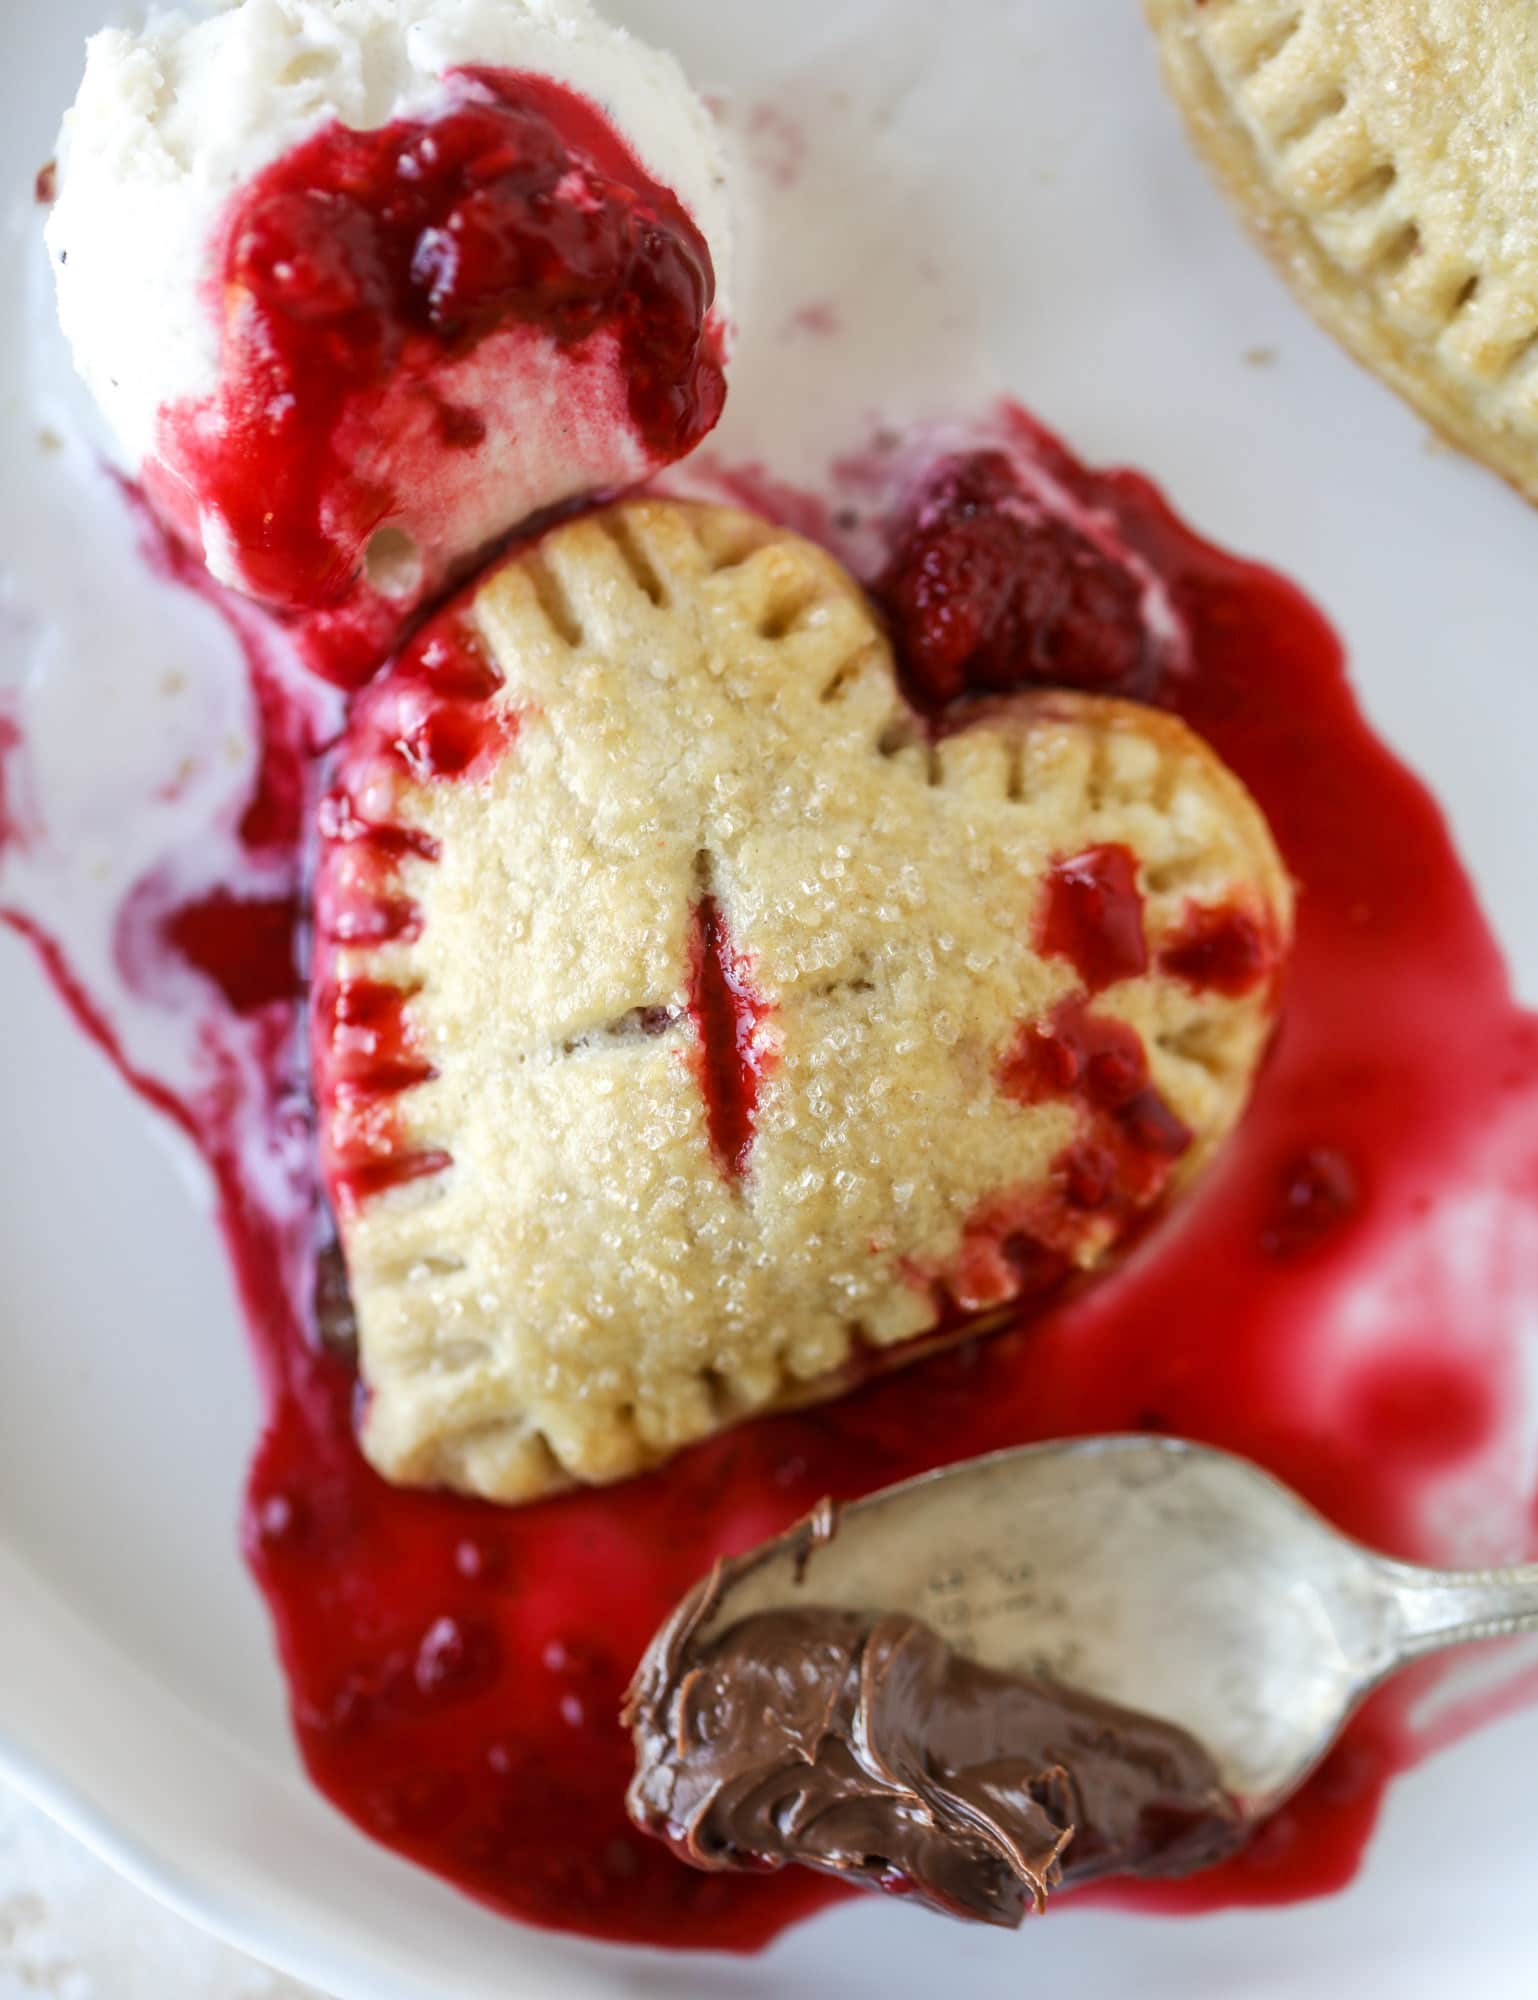 These adorable mini heart pies are filled with a homemade raspberry compote and creamy, chocolatey nutella. So fun and easy to make! I howsweeteats.com #heart #pie